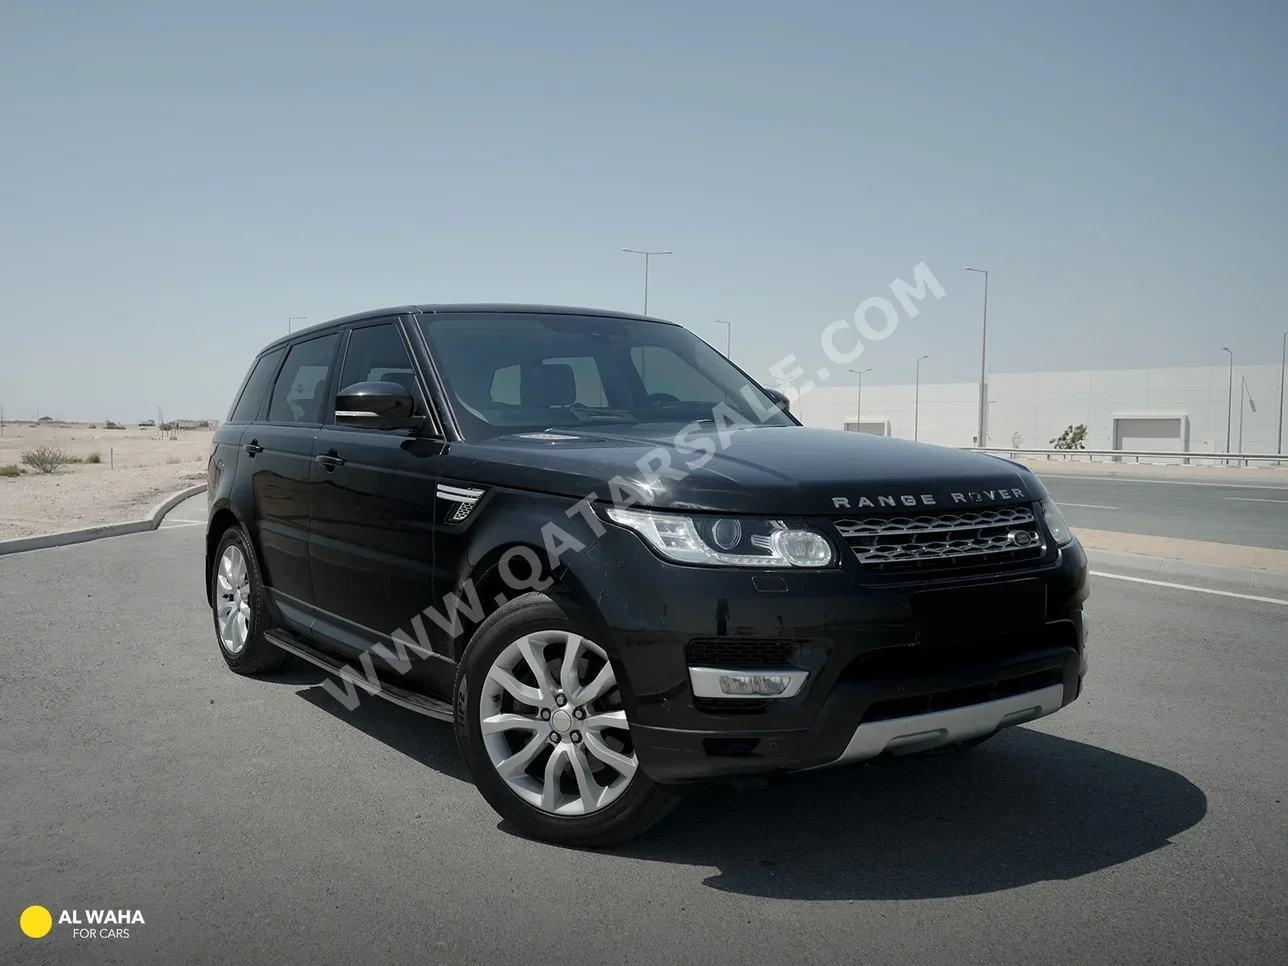 Land Rover  Range Rover  Sport  2014  Automatic  133,000 Km  6 Cylinder  Four Wheel Drive (4WD)  SUV  Black